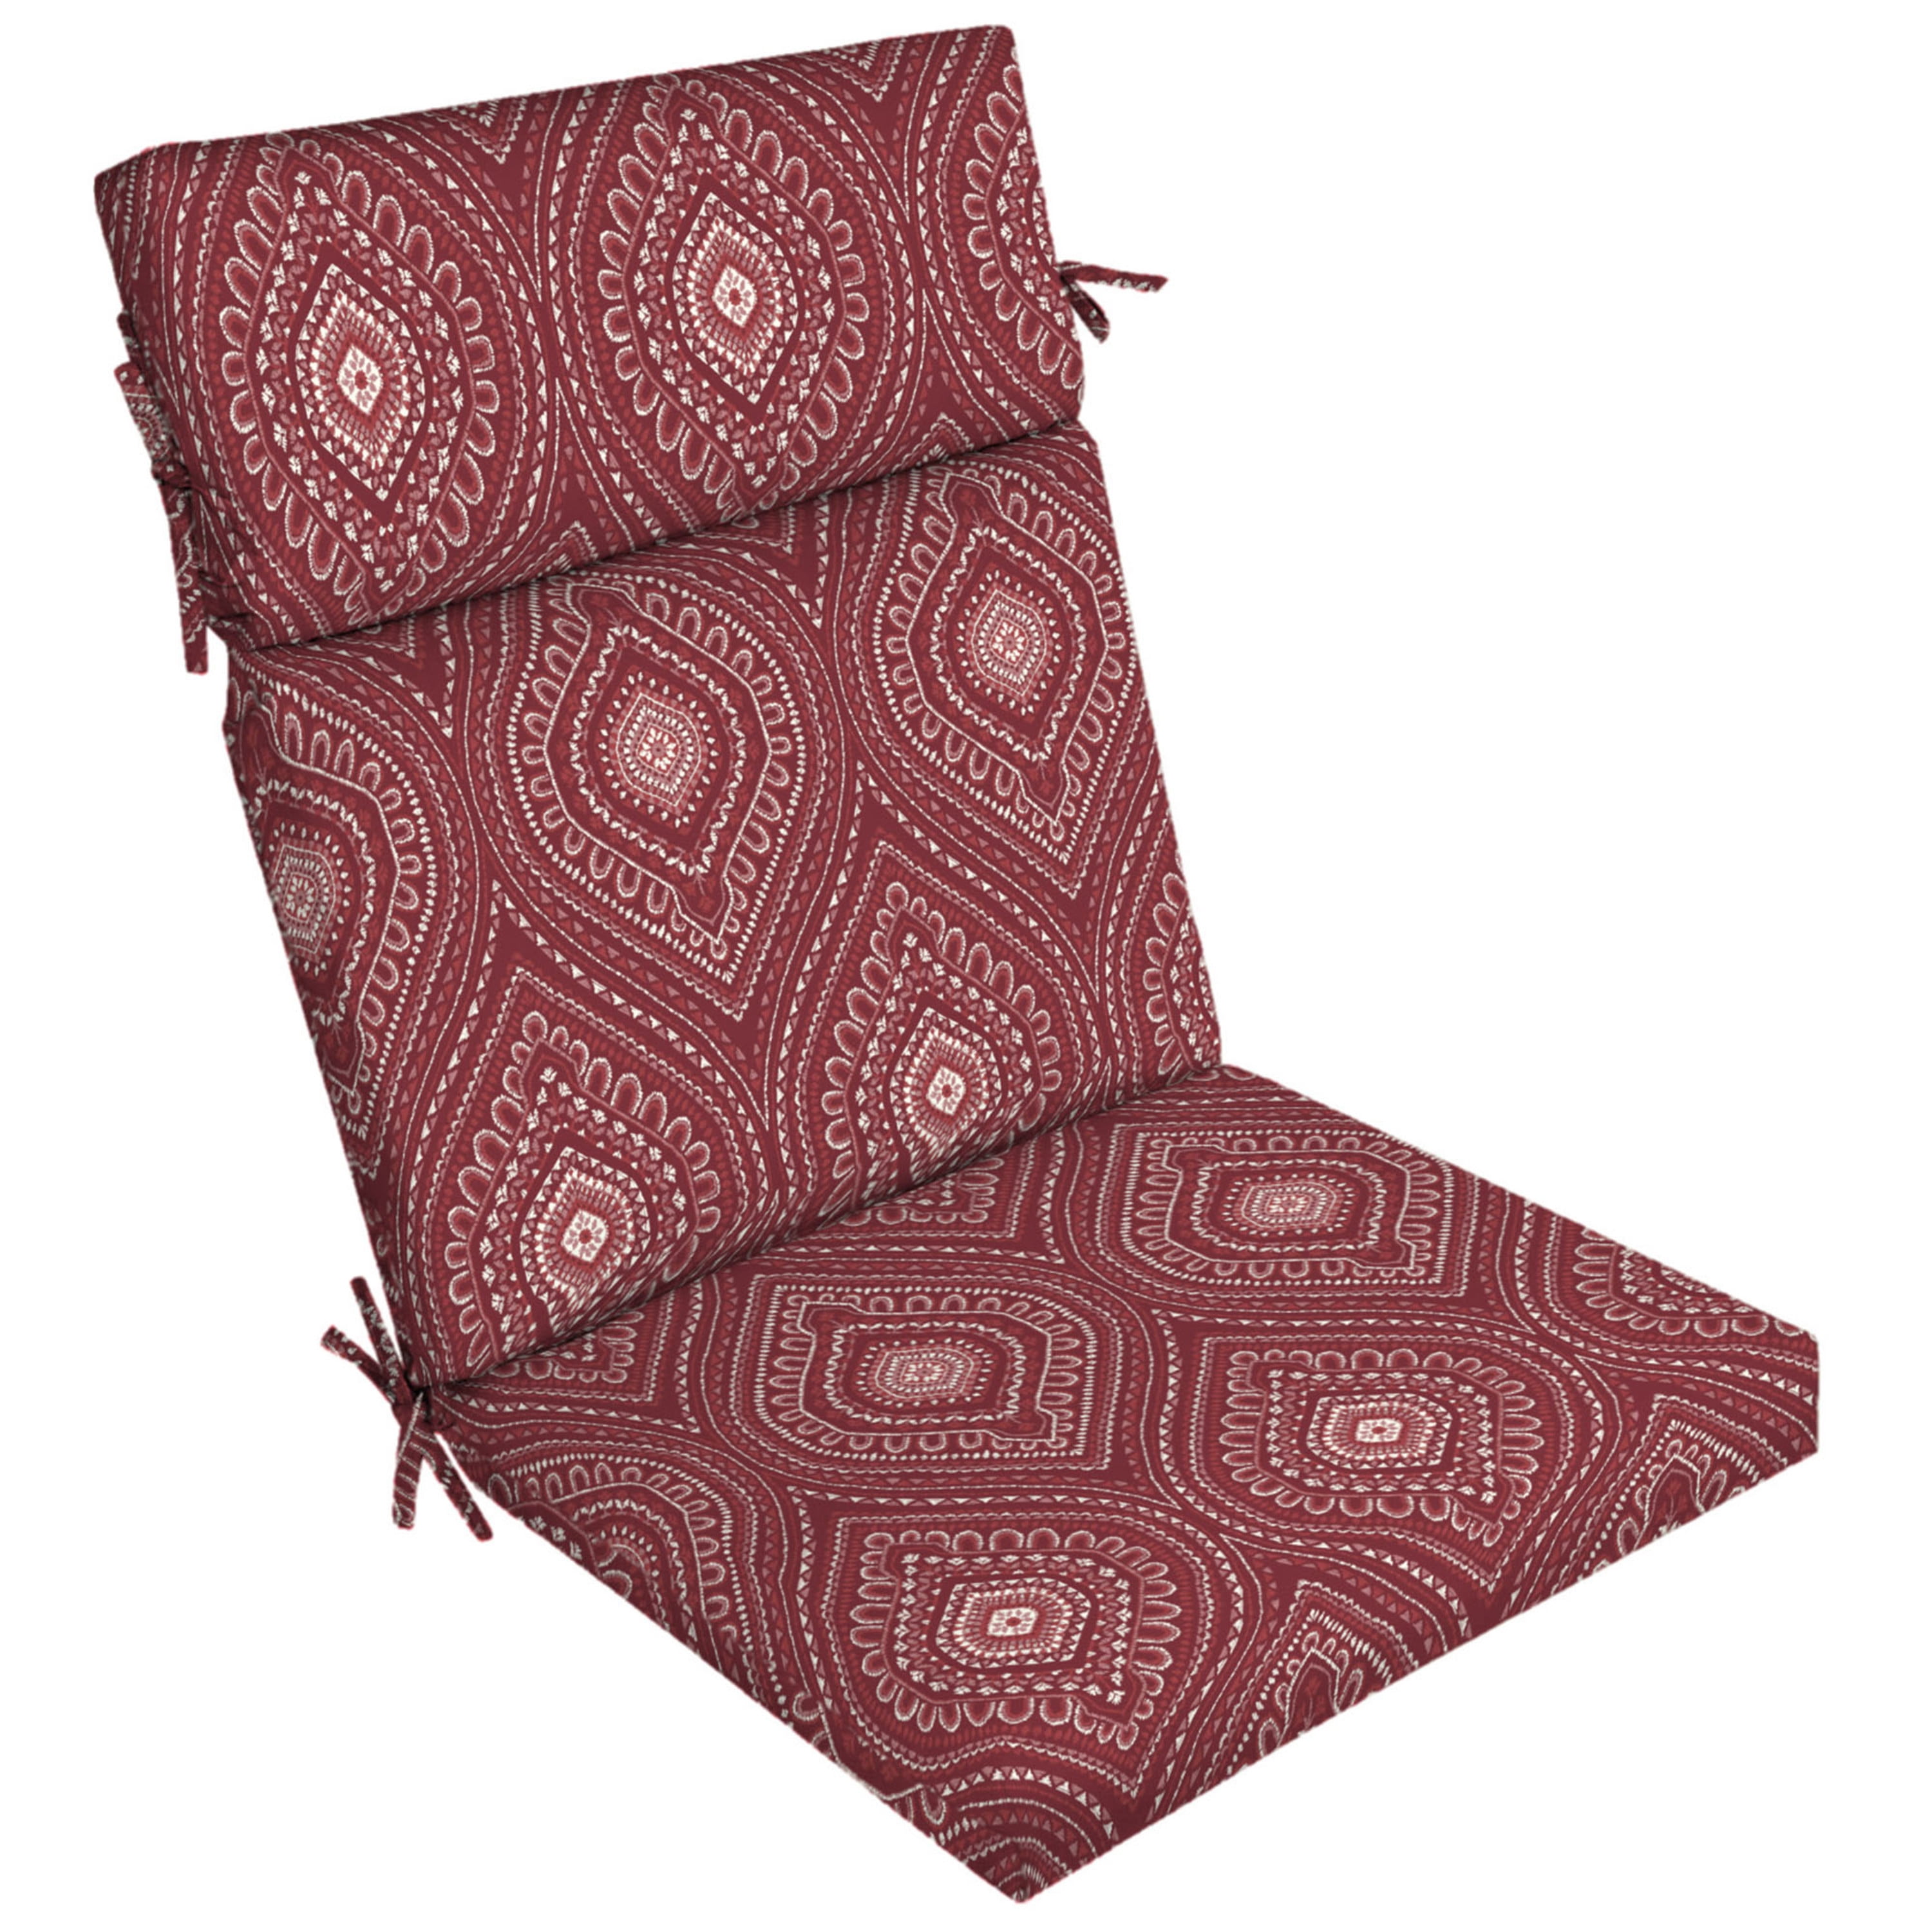 Better Homes & Gardens 44" x 21" Red Medallion Rectangle Outdoor Chair Cushion, 1 Piece